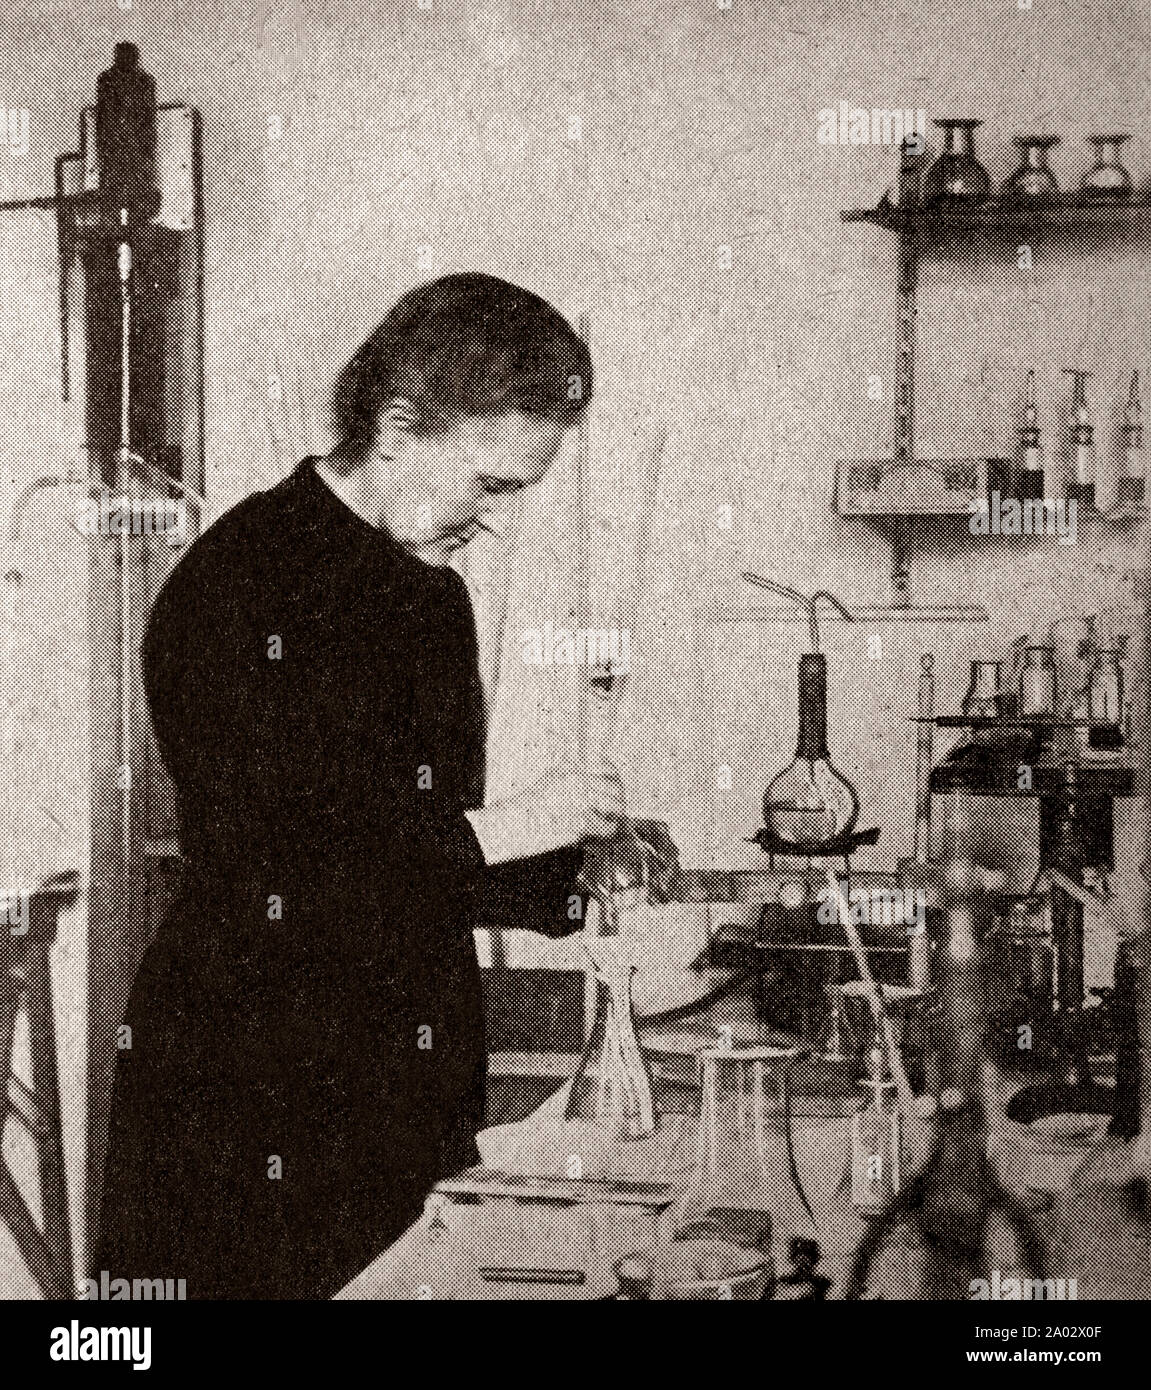 The latest engineering and technology from the 1930s: A portrait of Marie Curie ((1867–1934), Polish and naturalized-French physicist and chemist who conducted pioneering research on radioactivity. She was the first woman to win a Nobel Prize, is the only woman to win the Nobel prize twice, and is the only person to win the Nobel Prize in two different scientific fields. Stock Photo